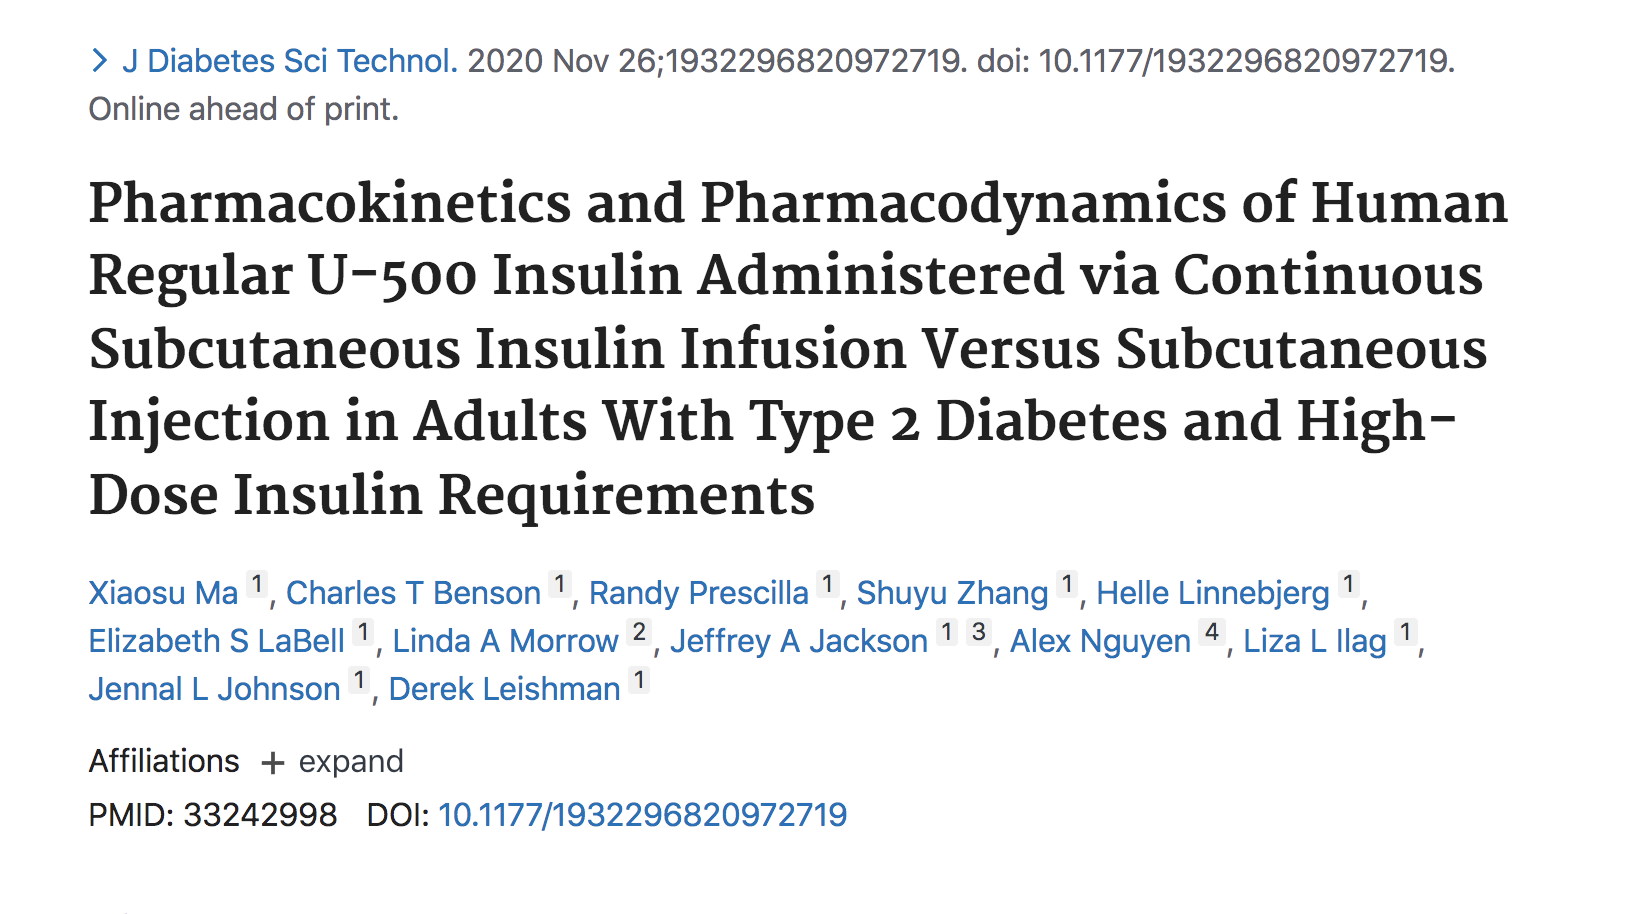 image of Pharmacokinetics and Pharmacodynamics of Human Regular U-500 Insulin (U-500R) Administered via Continuous Subcutaneous Insulin Infusion (CSII) vs. Subcutaneous Injection (SCI) in Adults with Type 2 Diabetes and High Insulin Requirements